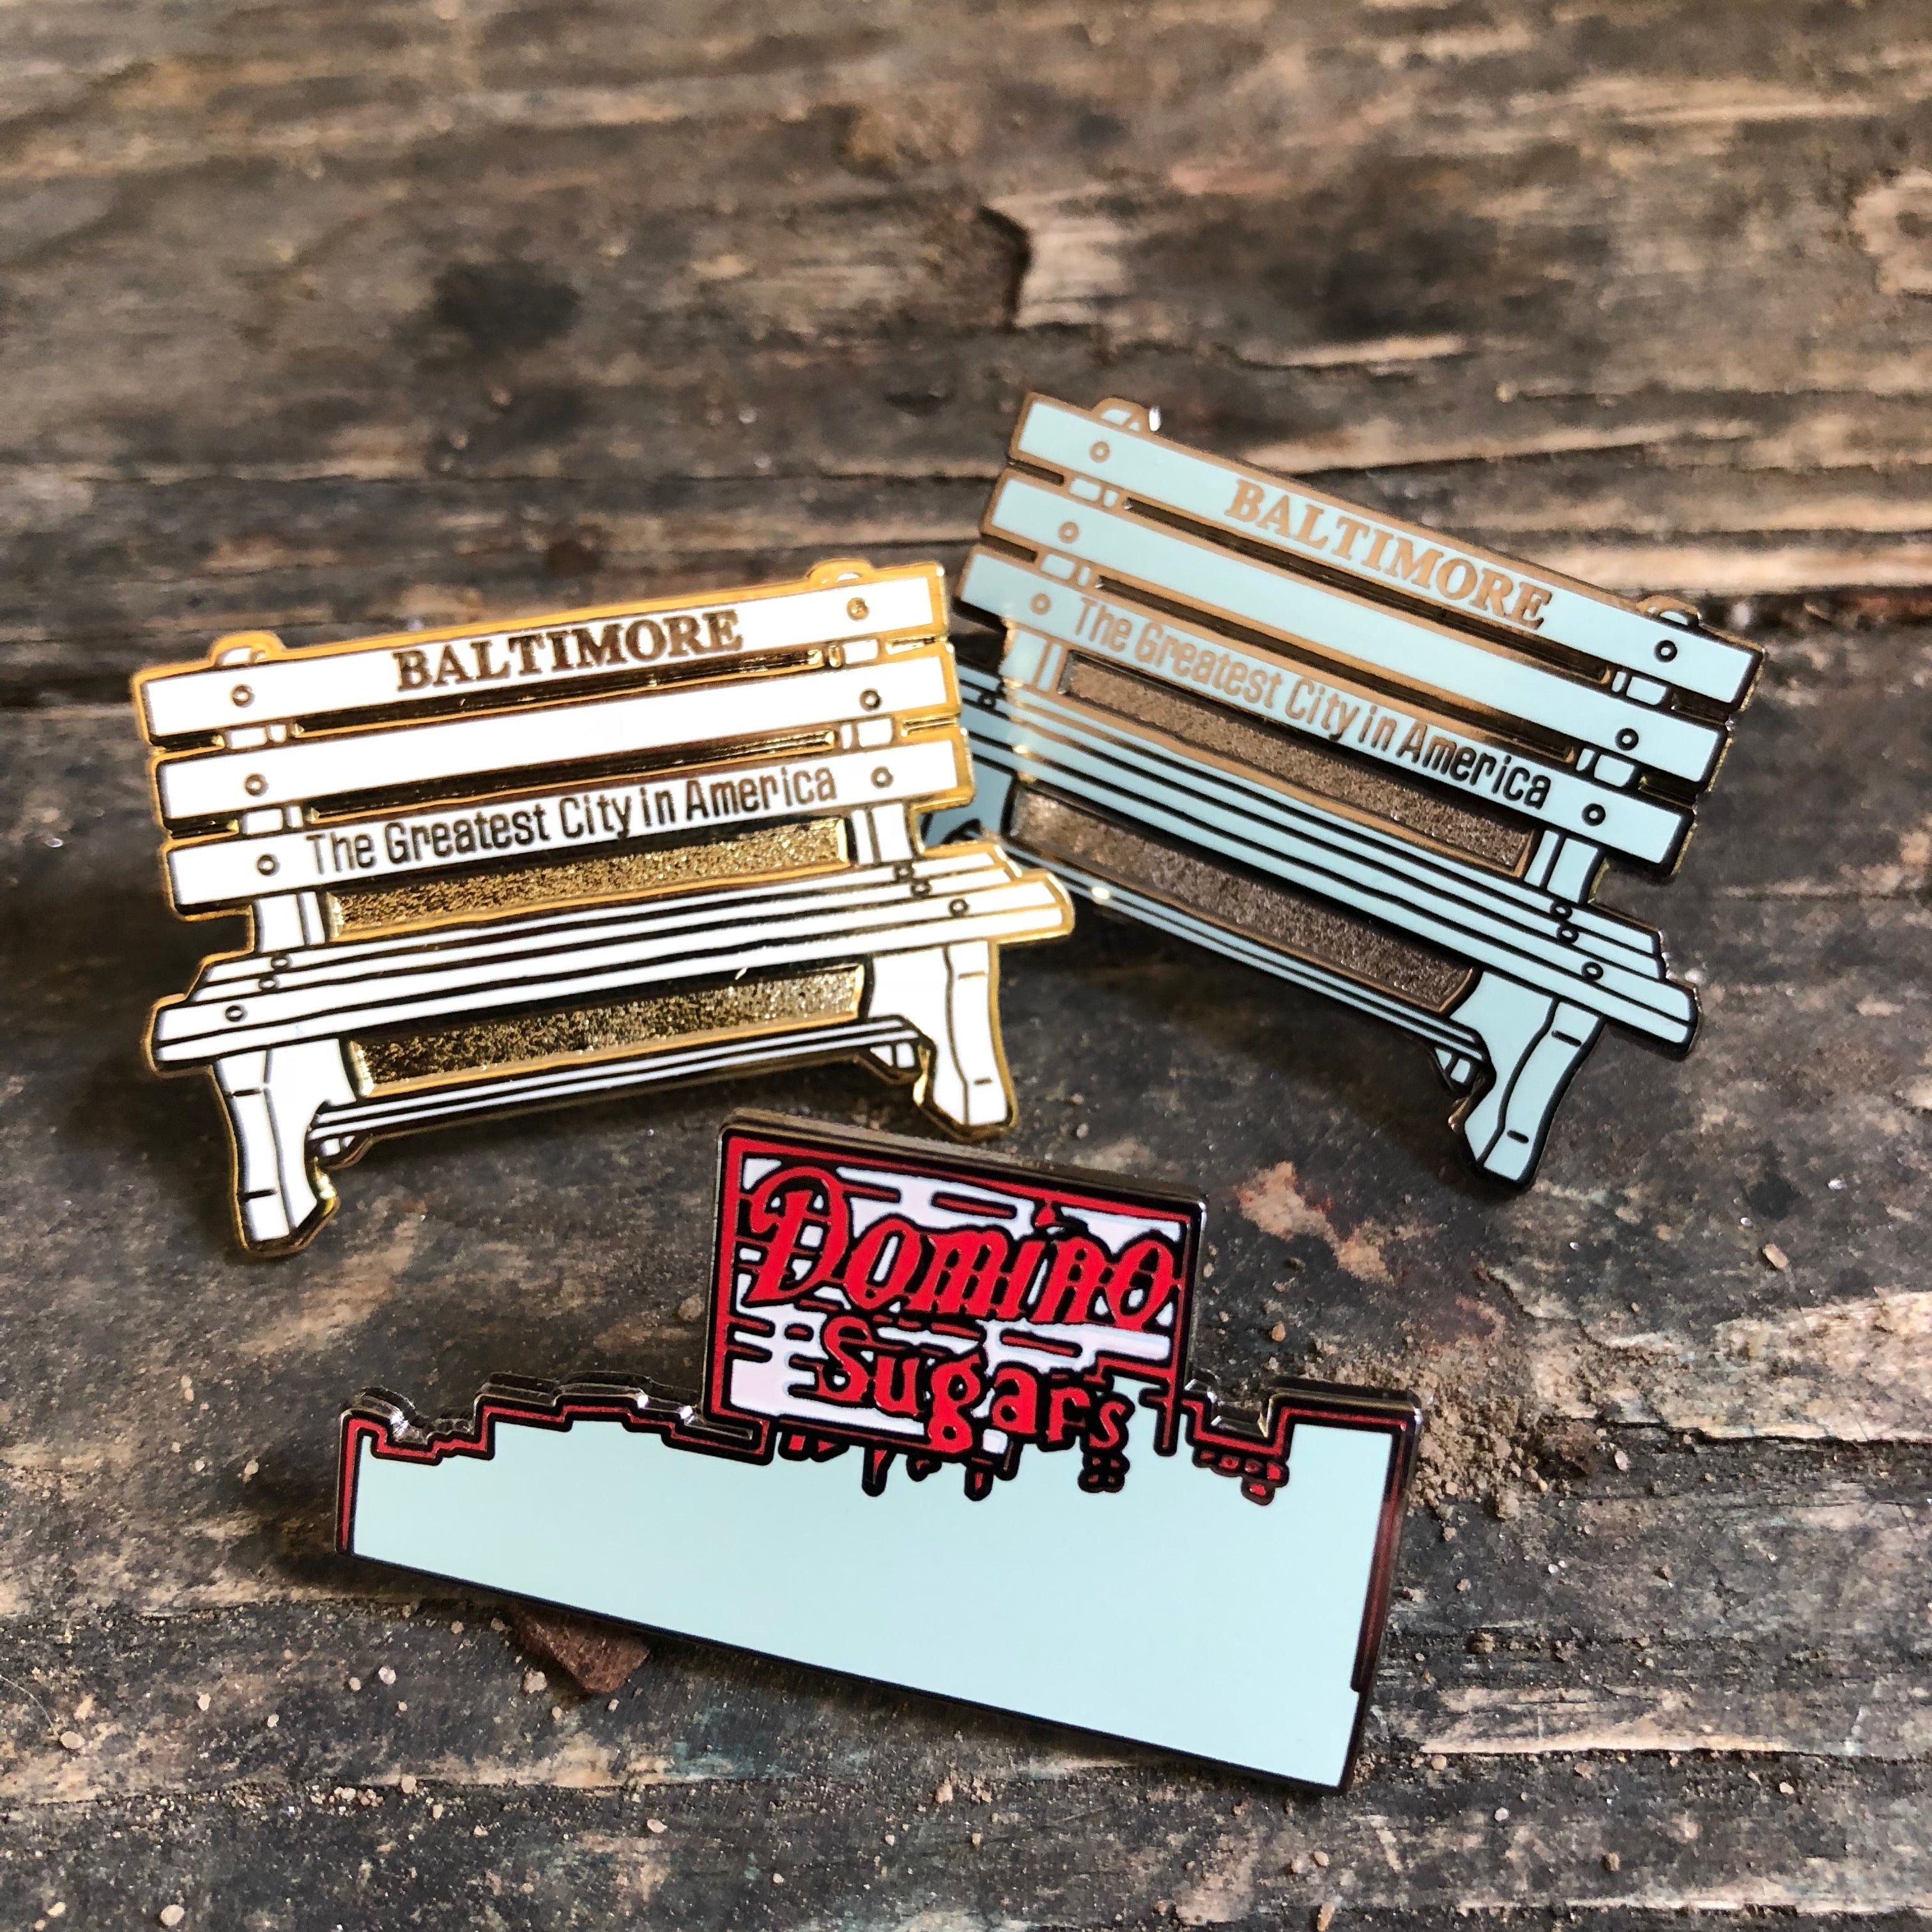 Baltimore Maryland | Greatest City in America Bench Pin